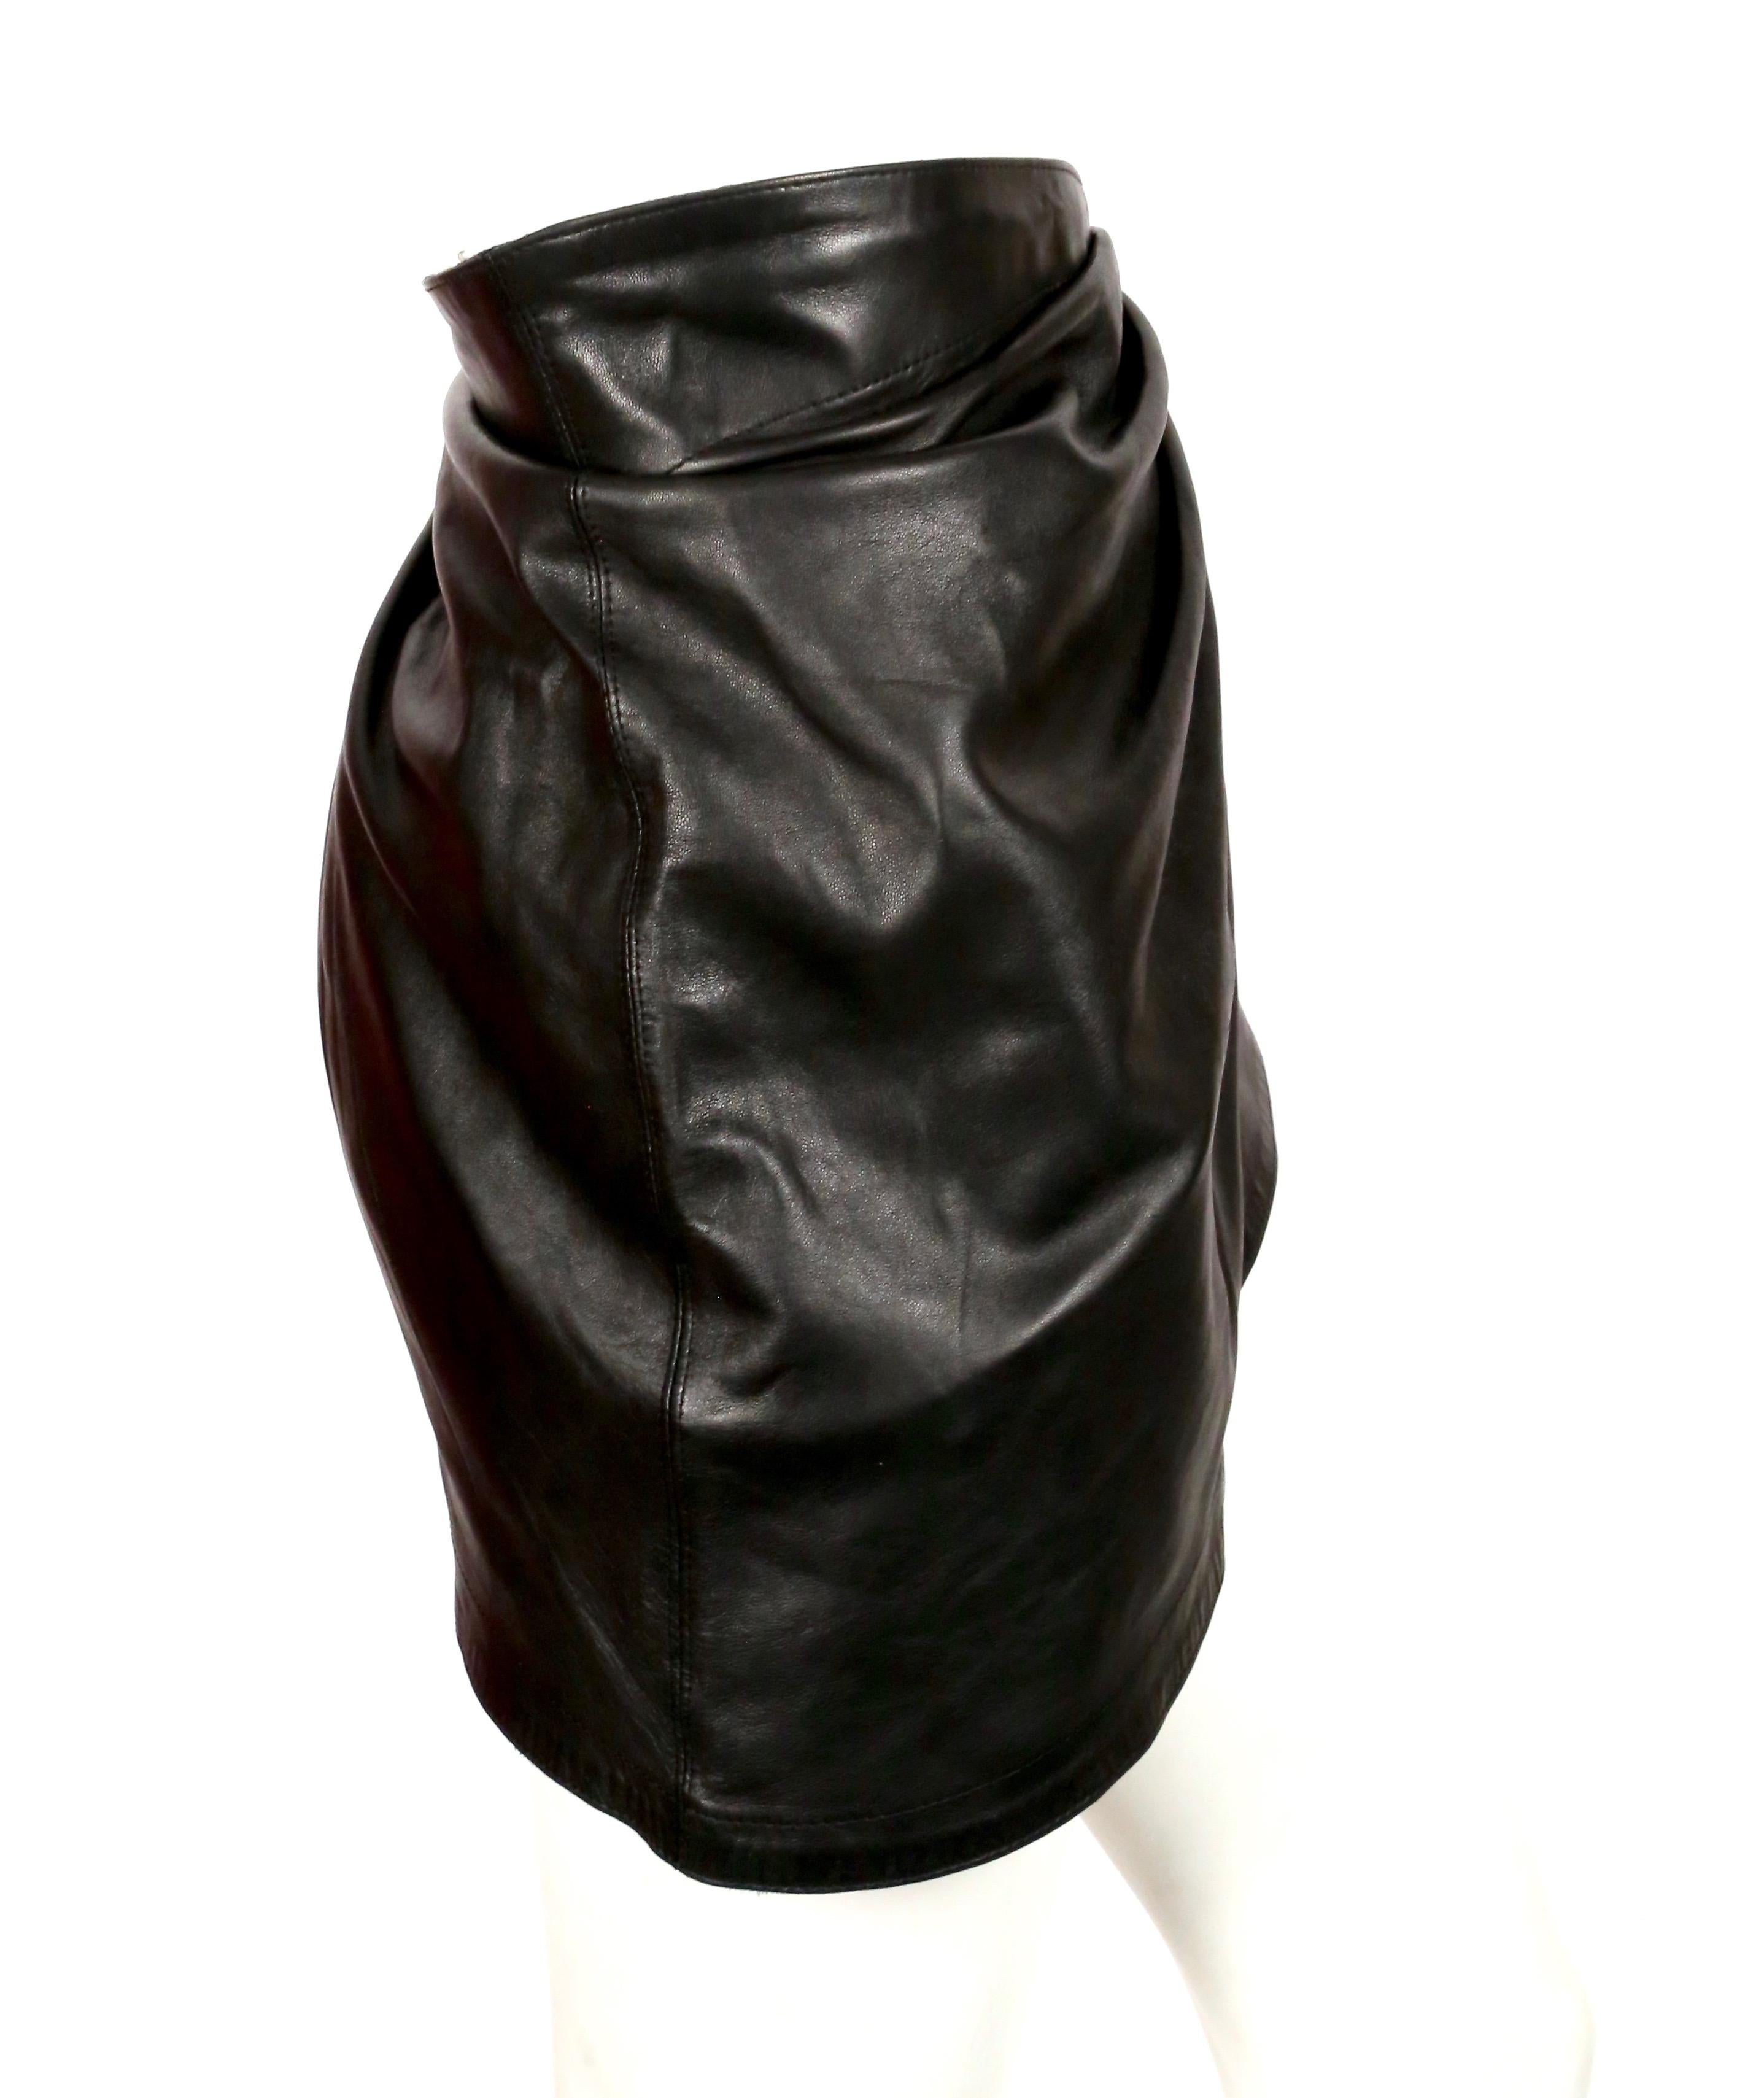 Unique lambskin mini-skirt with amazing drape and buckle detail from Azzedine Alaia dating to the 1980's. Skirt has a removable underlayer that creates additional volume. Skirt can also be worn as a belt. Size 38. It is adjustable due to the buckle